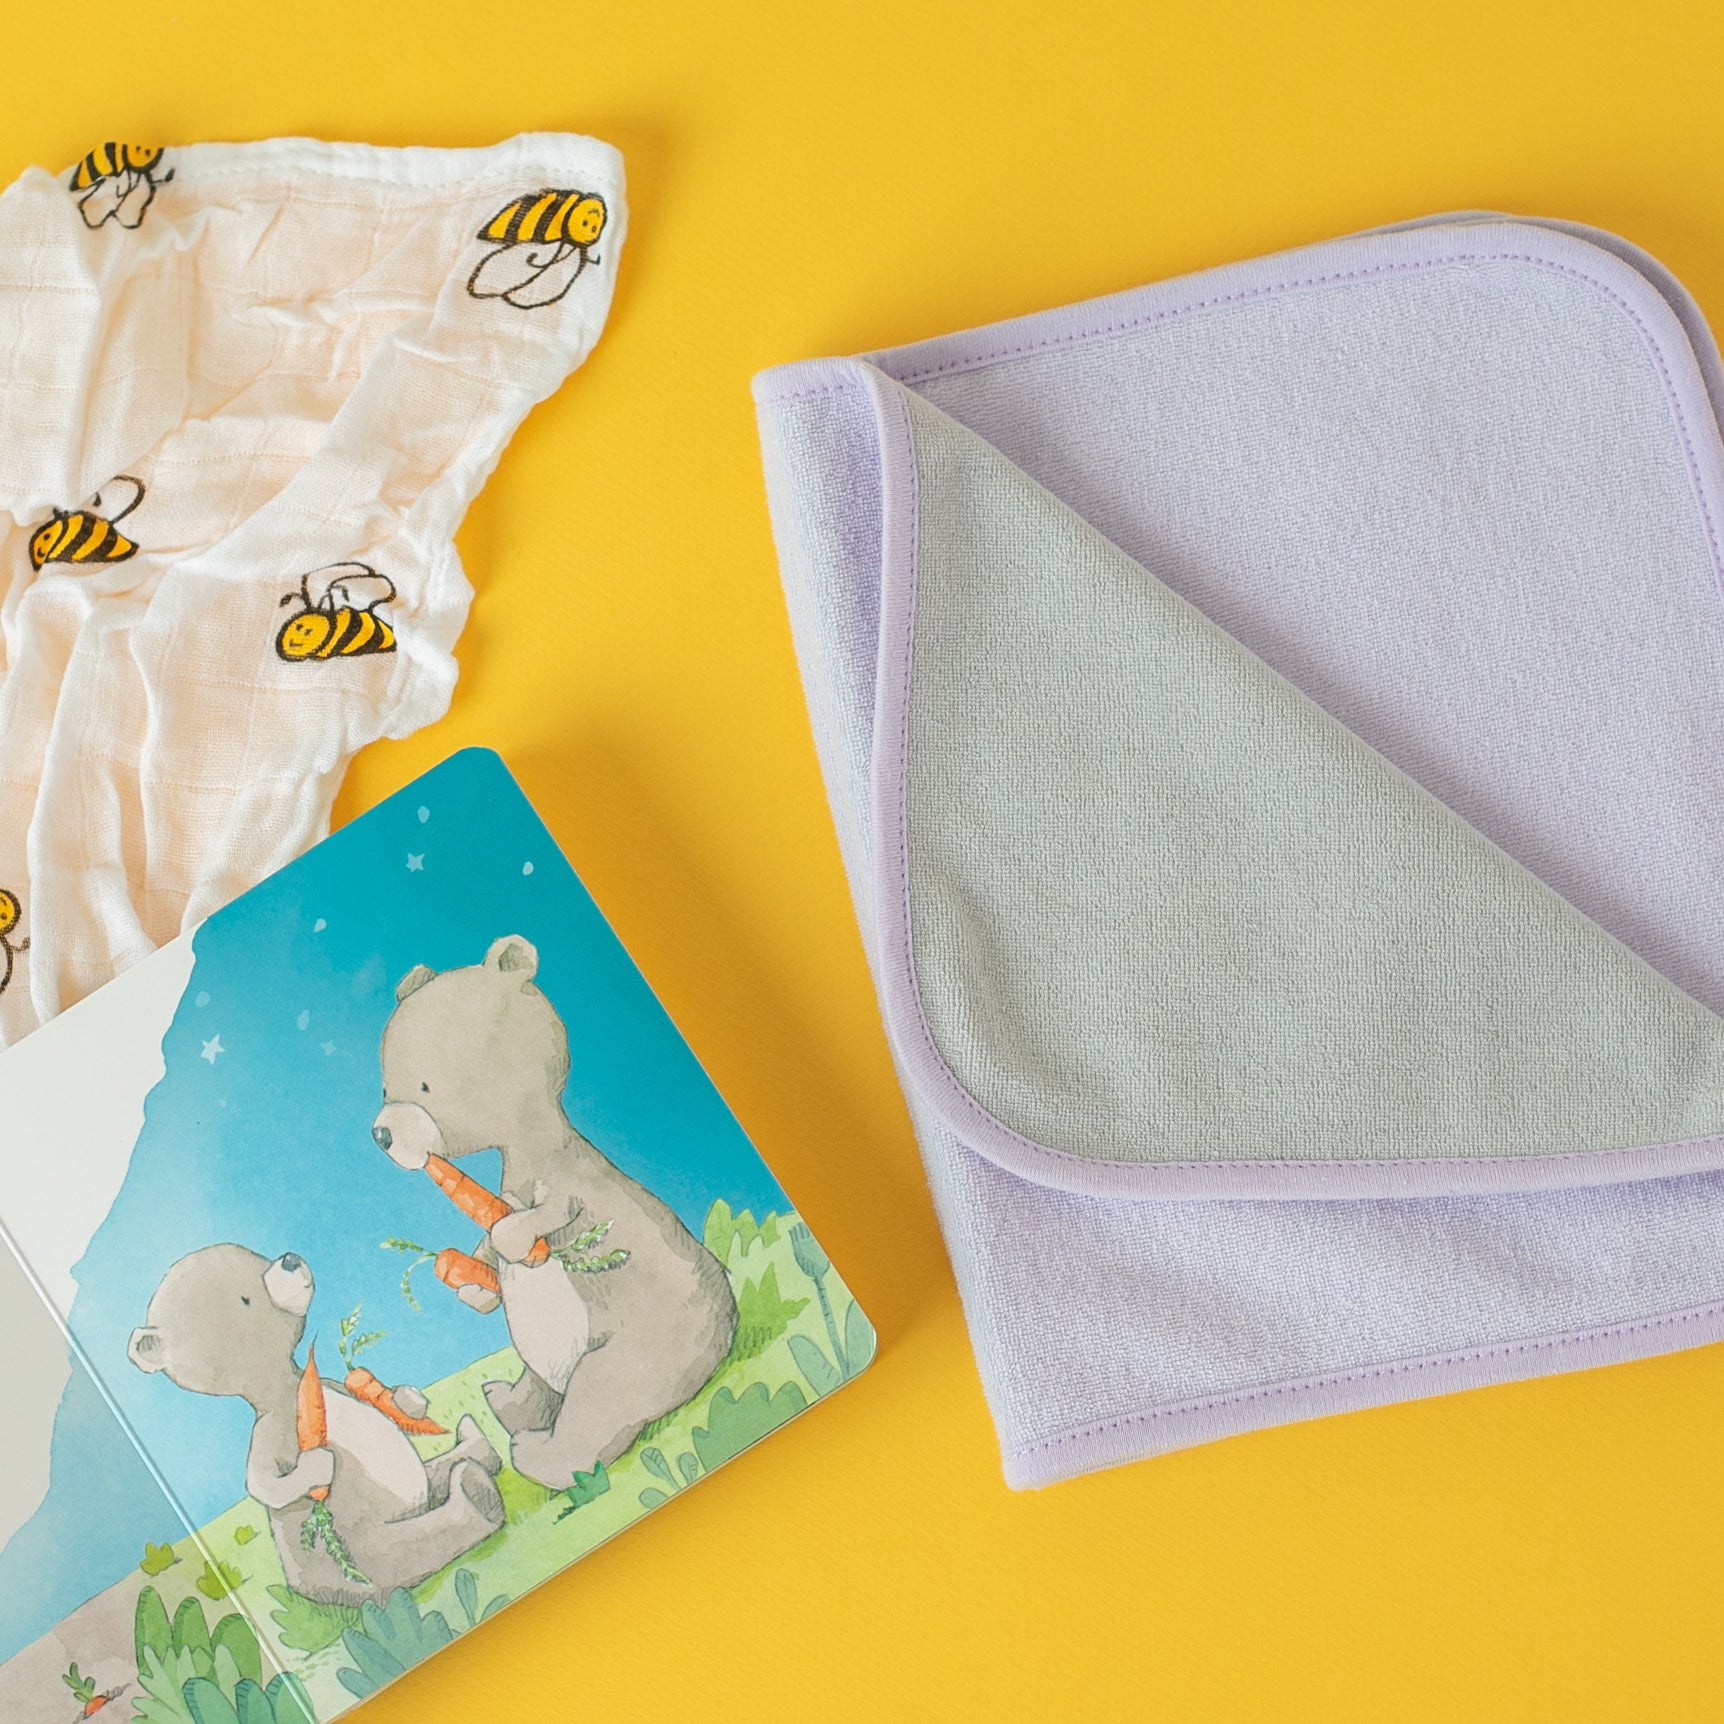 GROWNSY Baby Shower Gifts, Unisex Baby Gift Set with Baby Memory Book,  Swaddle Blanket, Cute Bunny, Hooded Bath Towel, Burp Cloth and Washcloth